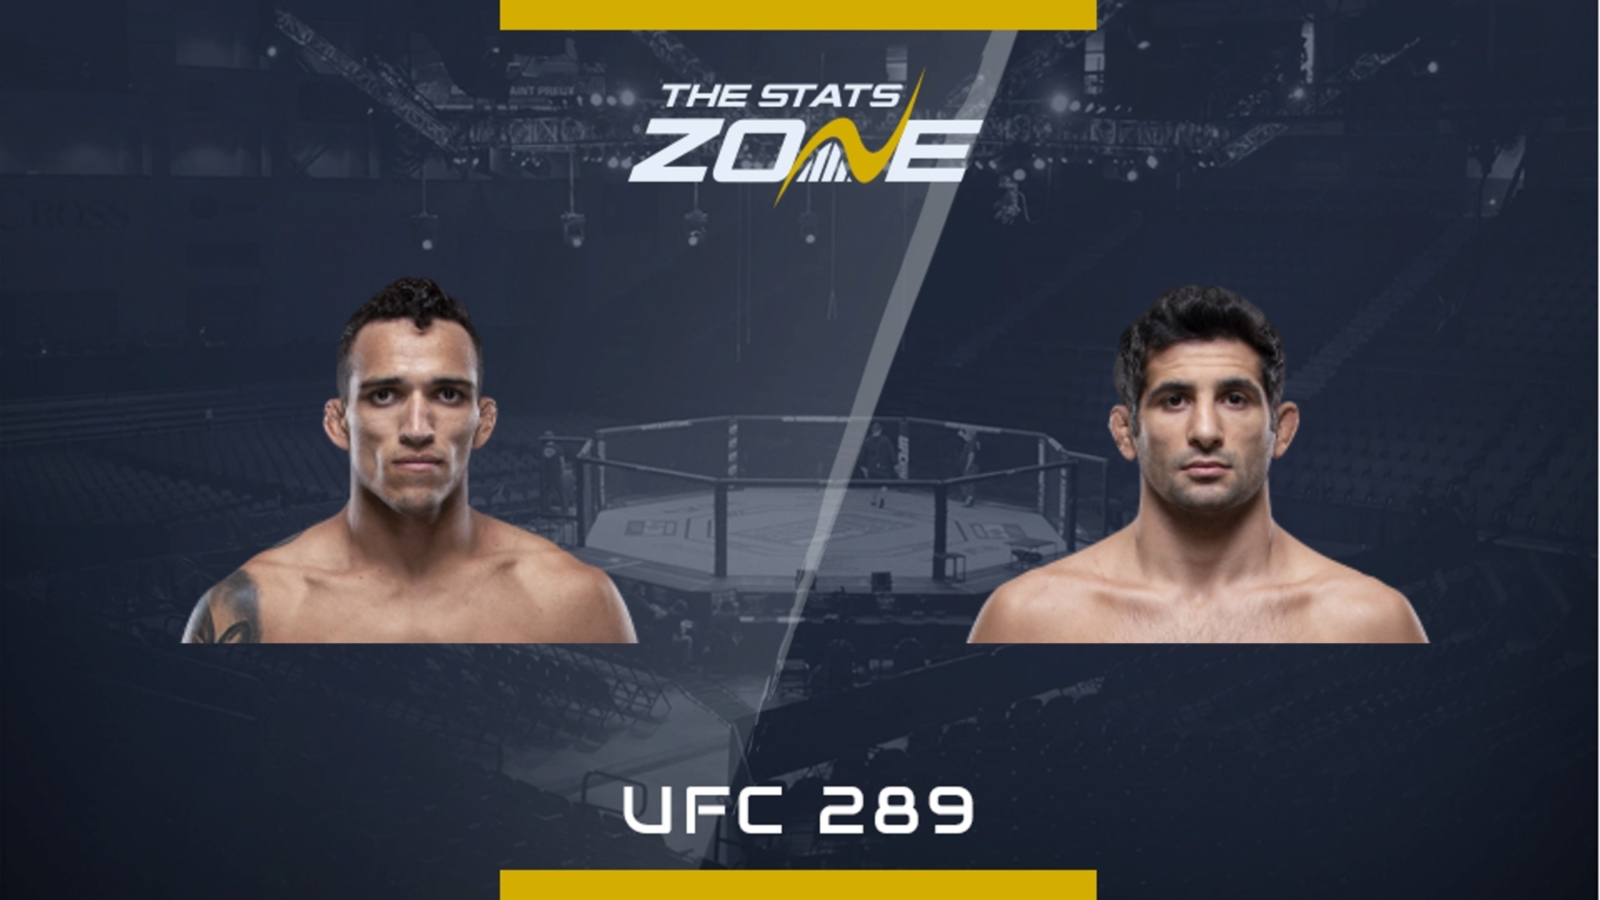 Charles Oliveira vs Beneil Dariush start time, undercard, TV channel and streaming info for UFC 289